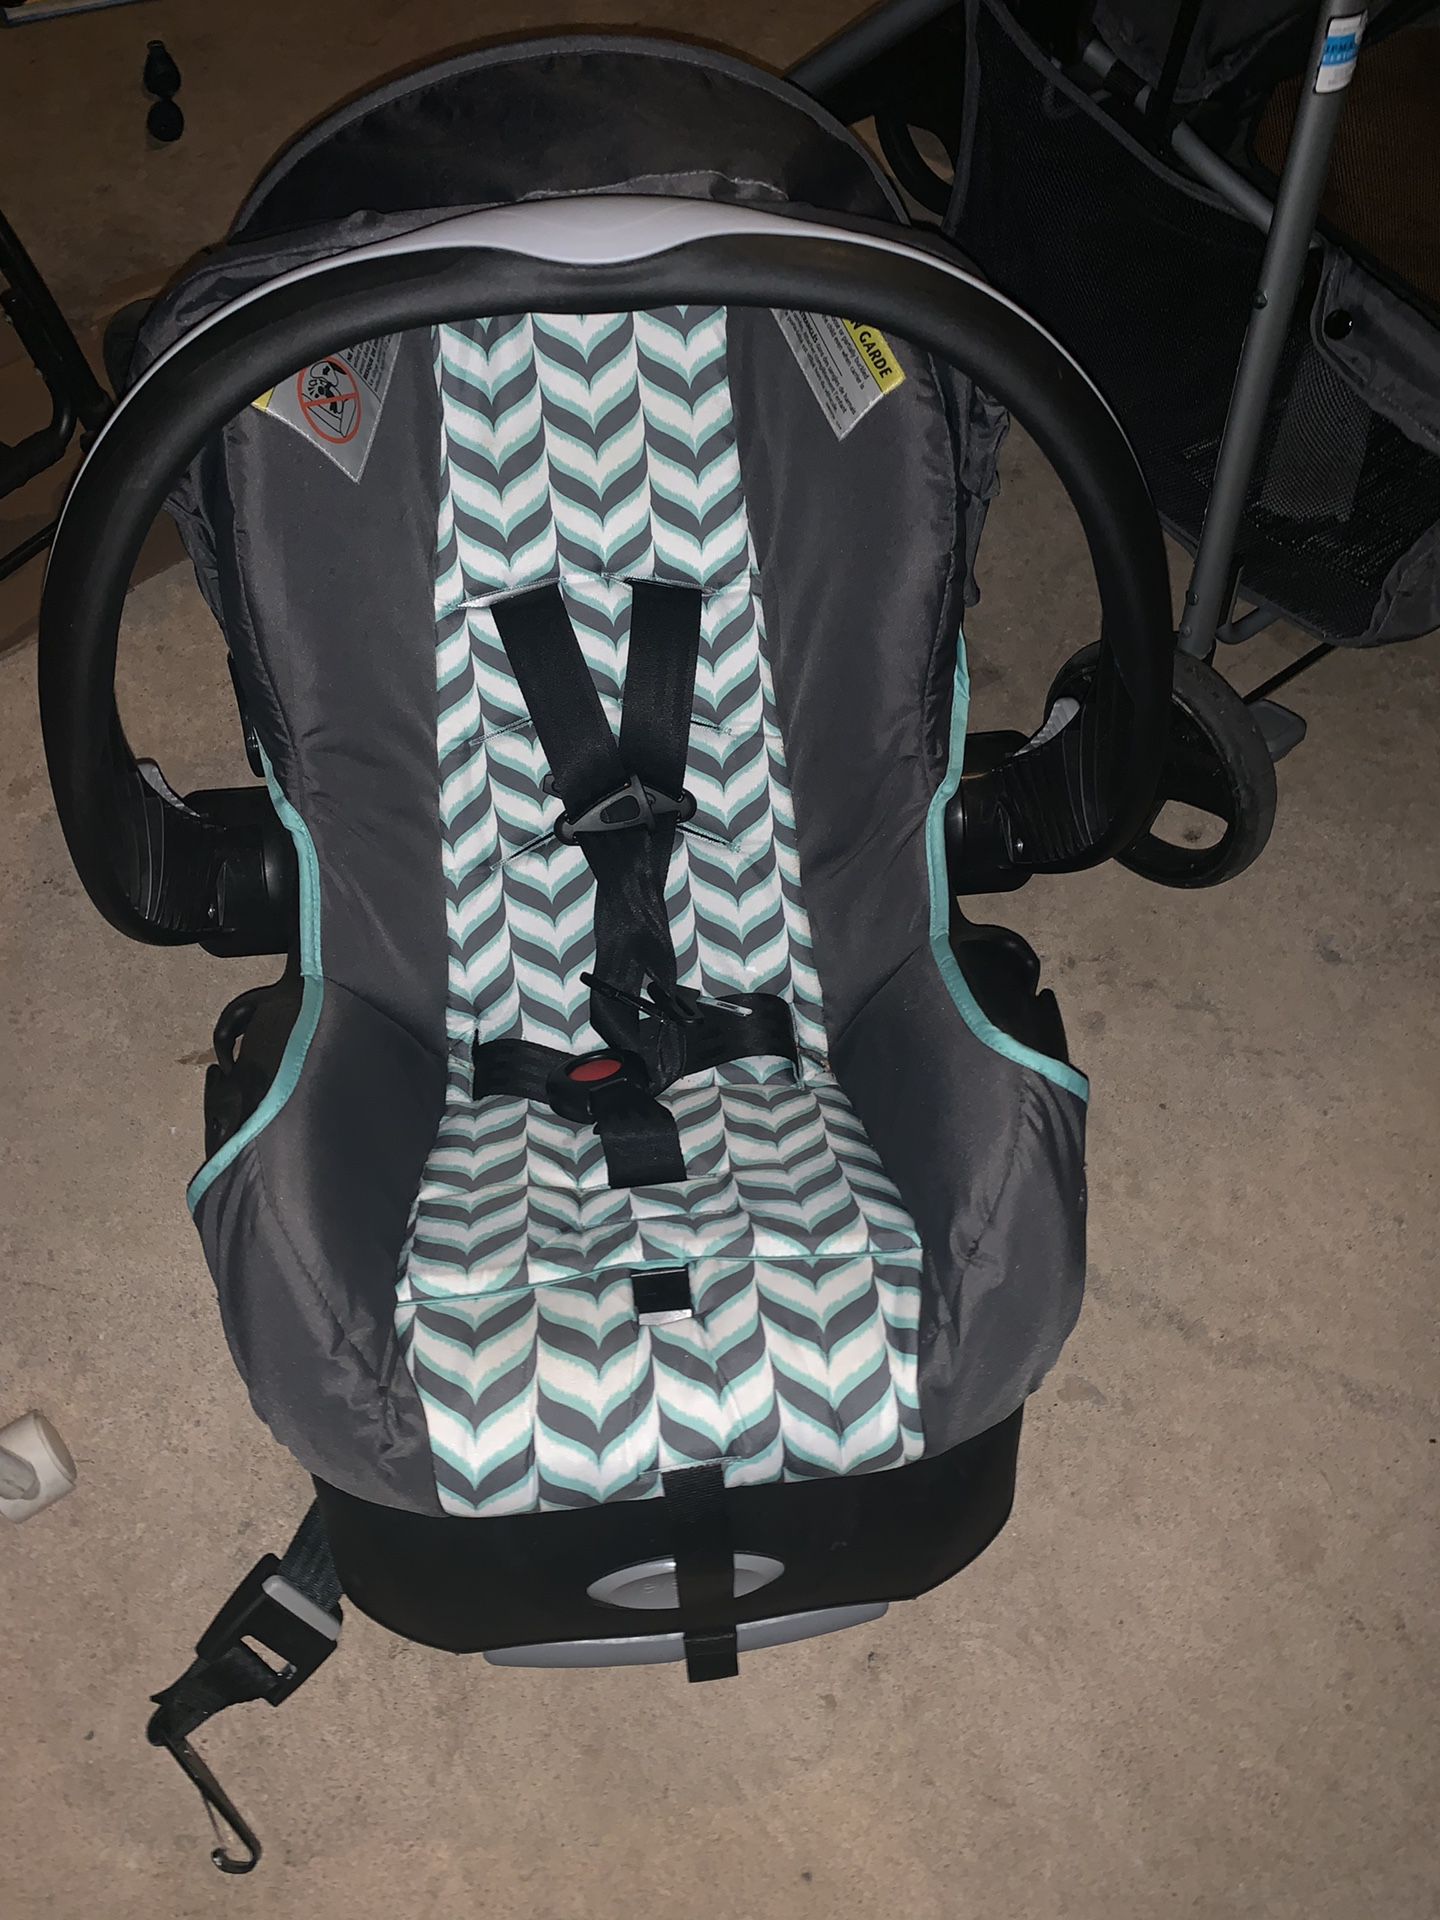 Baby car seat and stroller set